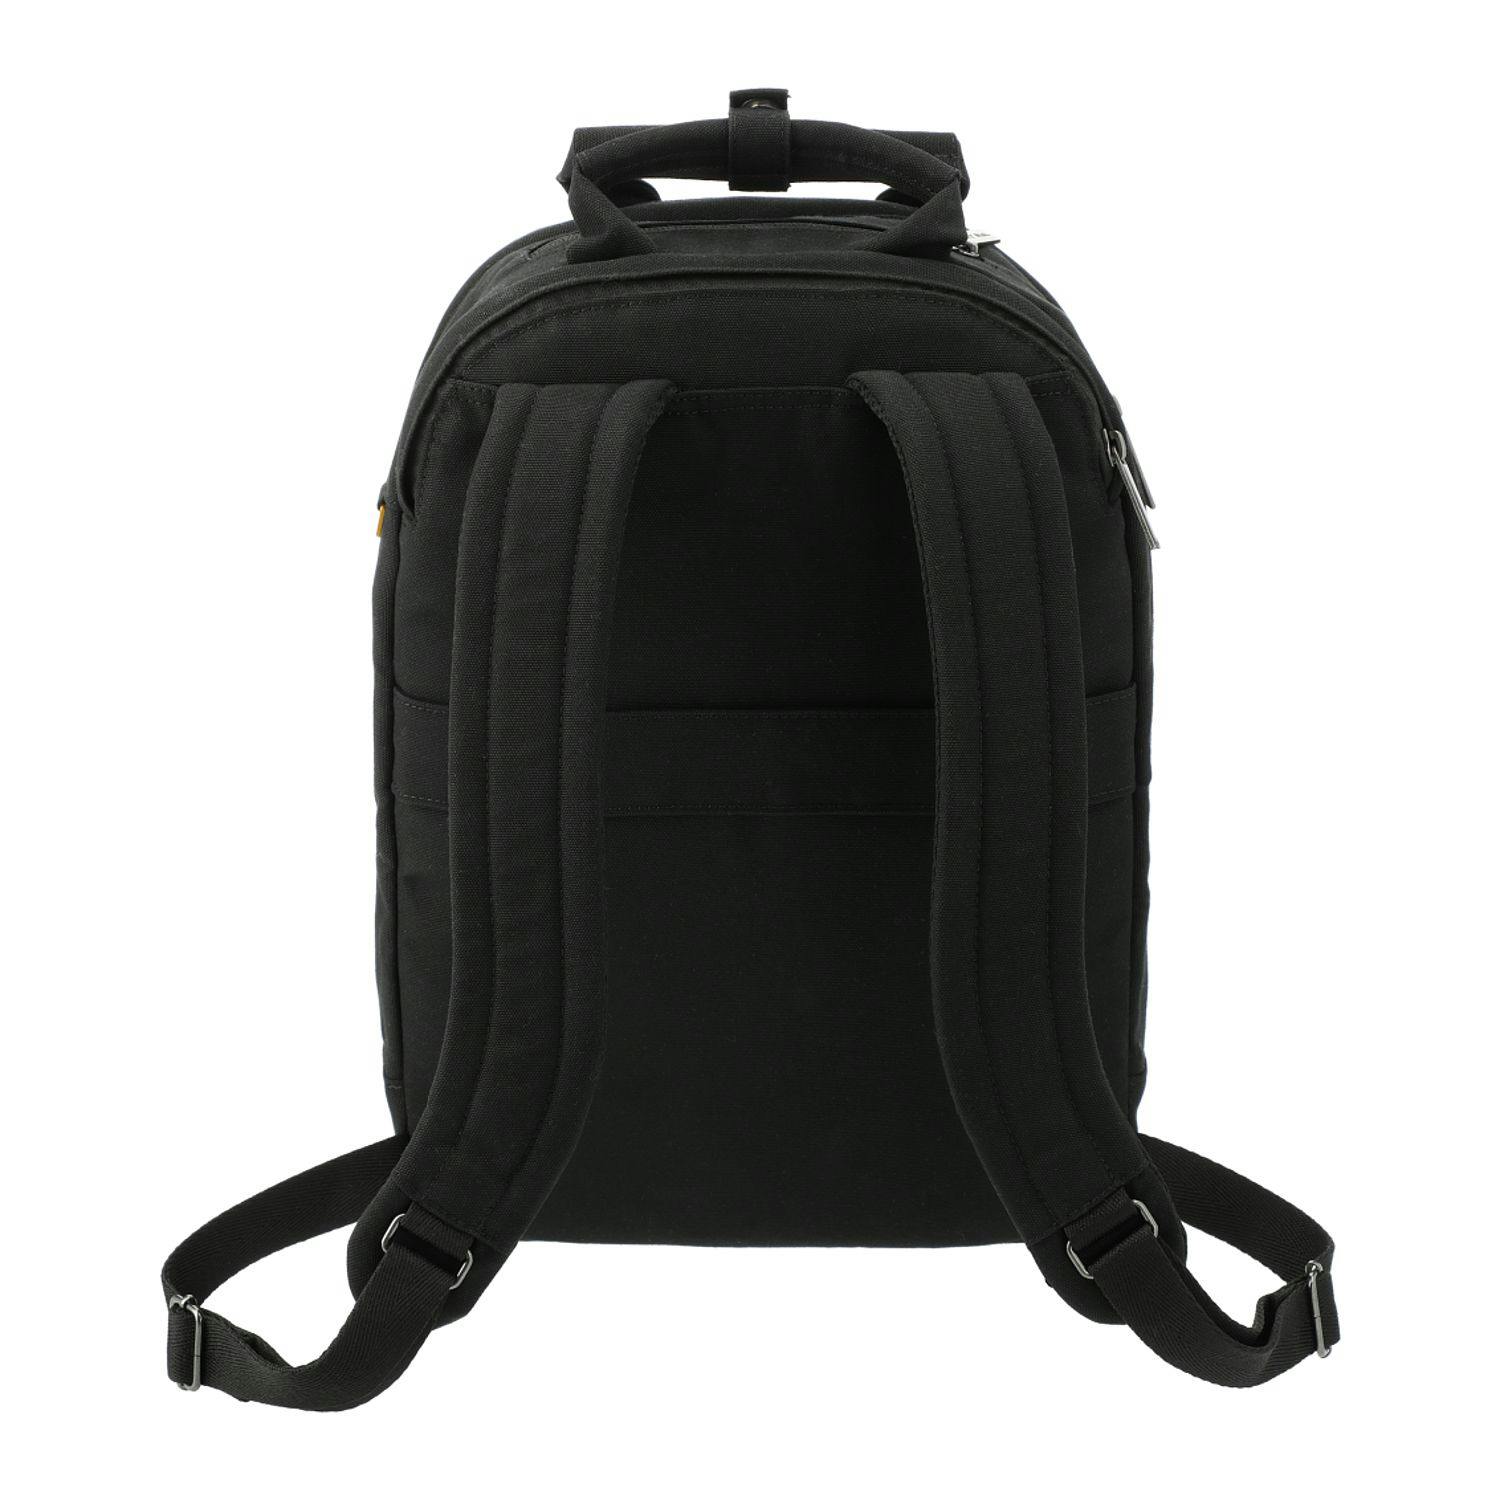 Day Owl Slim 14" Computer Backpack - additional Image 3